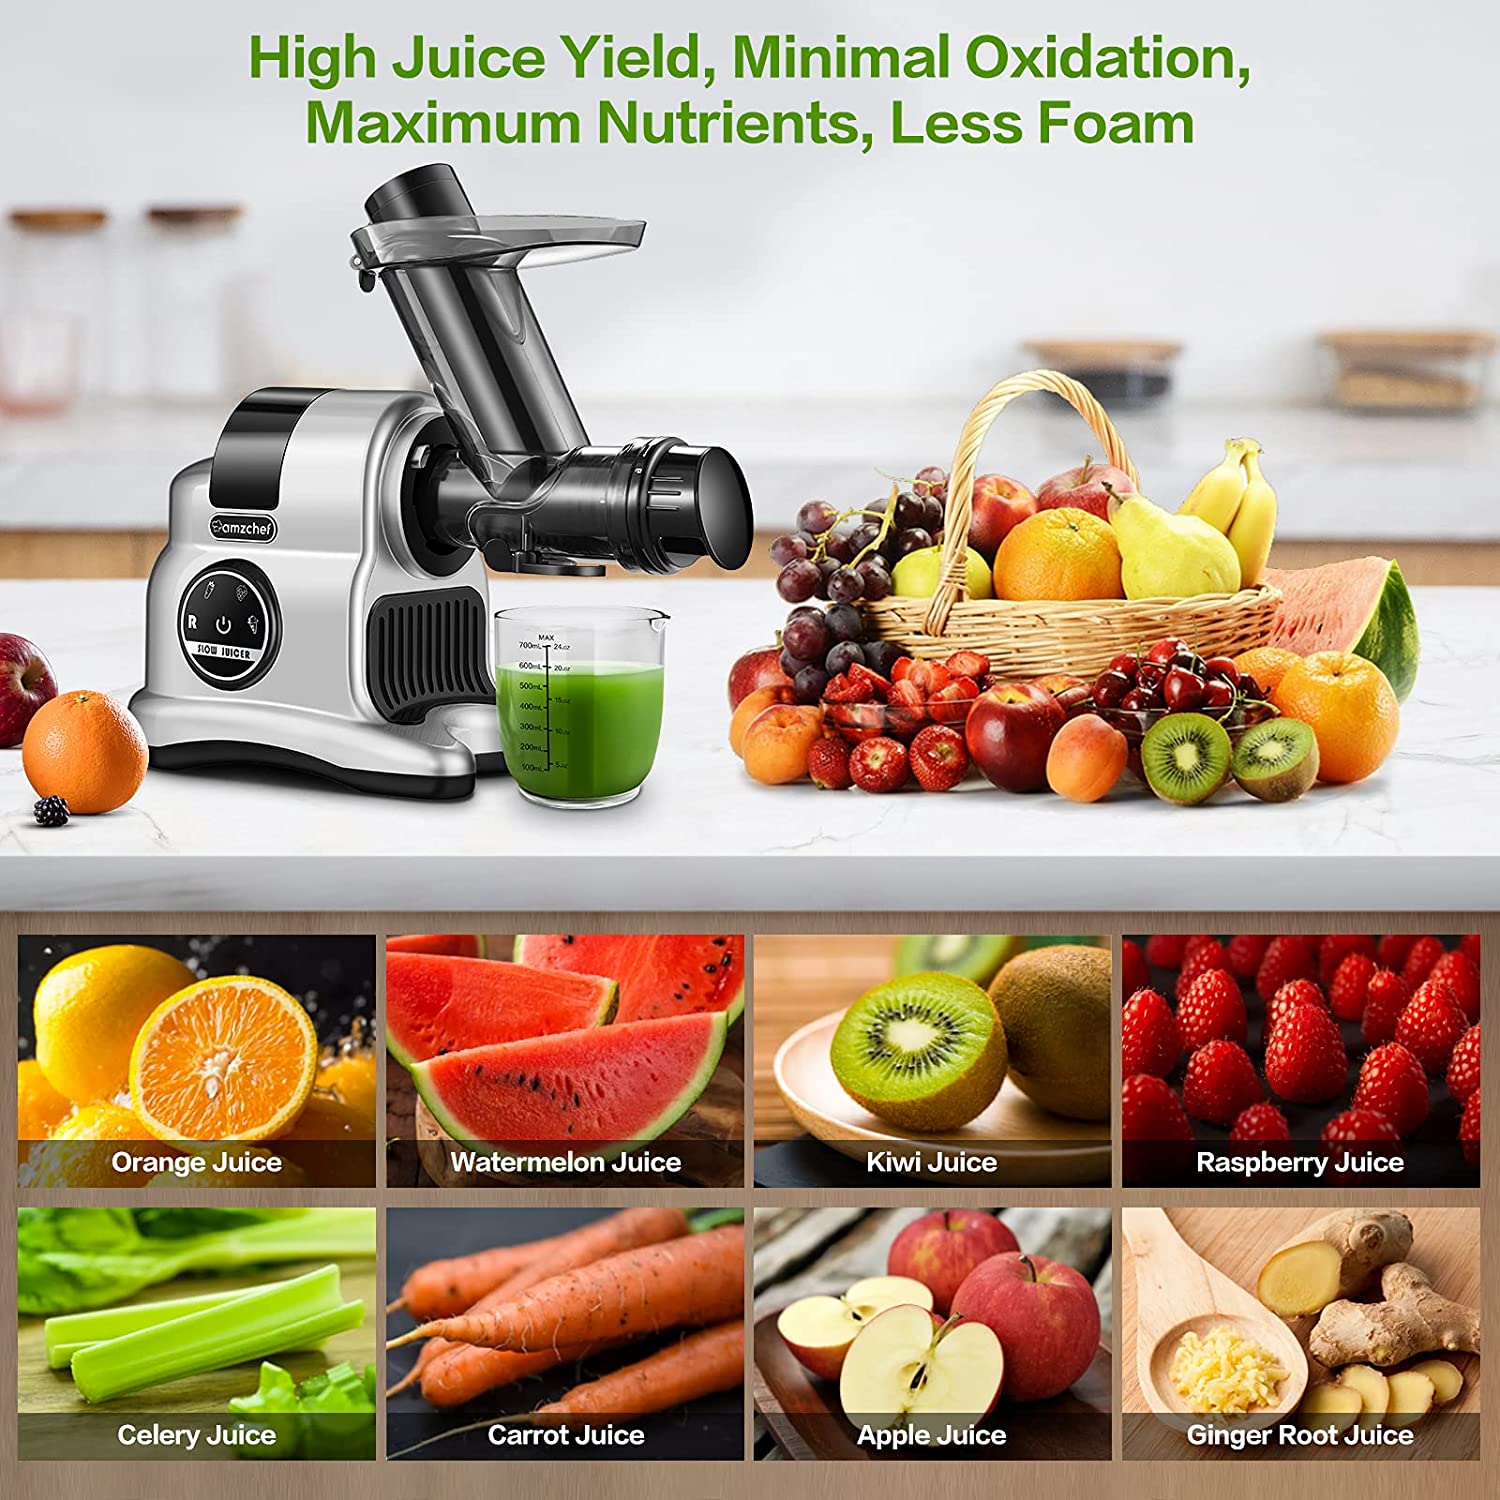 Juicer Machines, AMZCHEF Innovative Cold Press Juicer with high Juice Yield, Slow Masticating Juicer for Vegetables and Fruits,Juice Extractor with Reverse, Slow Juicer, Easy to Clean, Operate Quiet